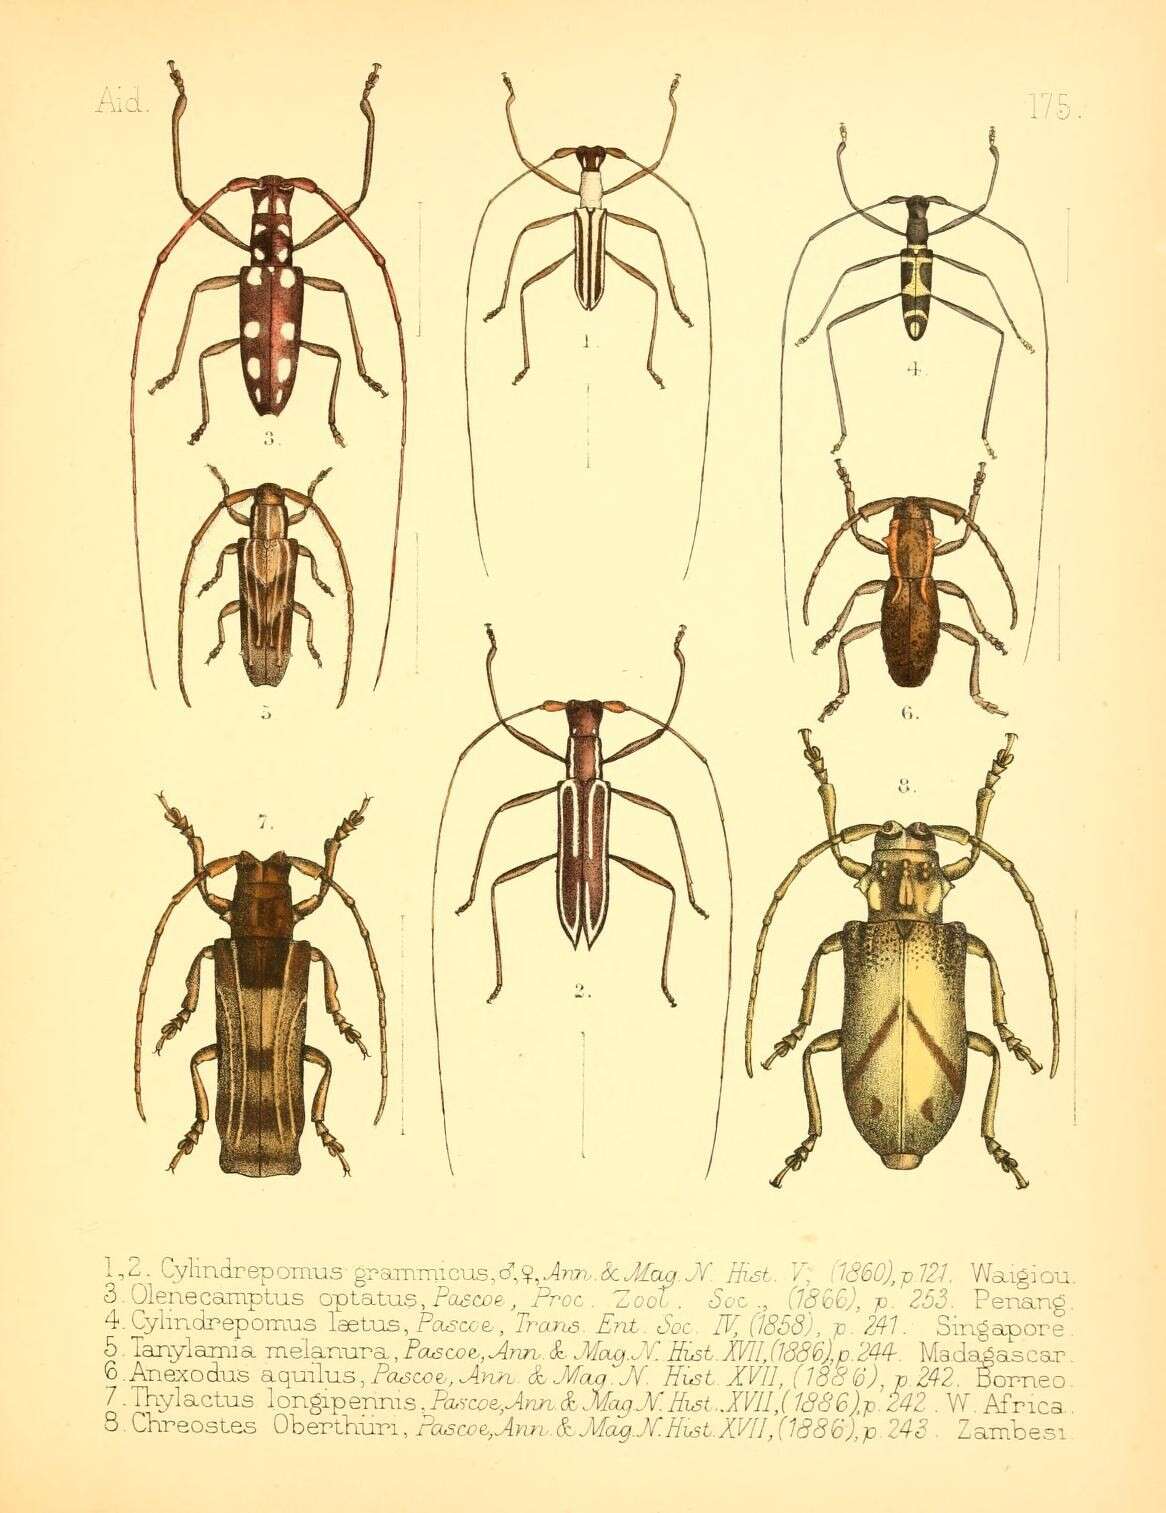 Image of Cylindrepomus grammicus Pascoe 1860